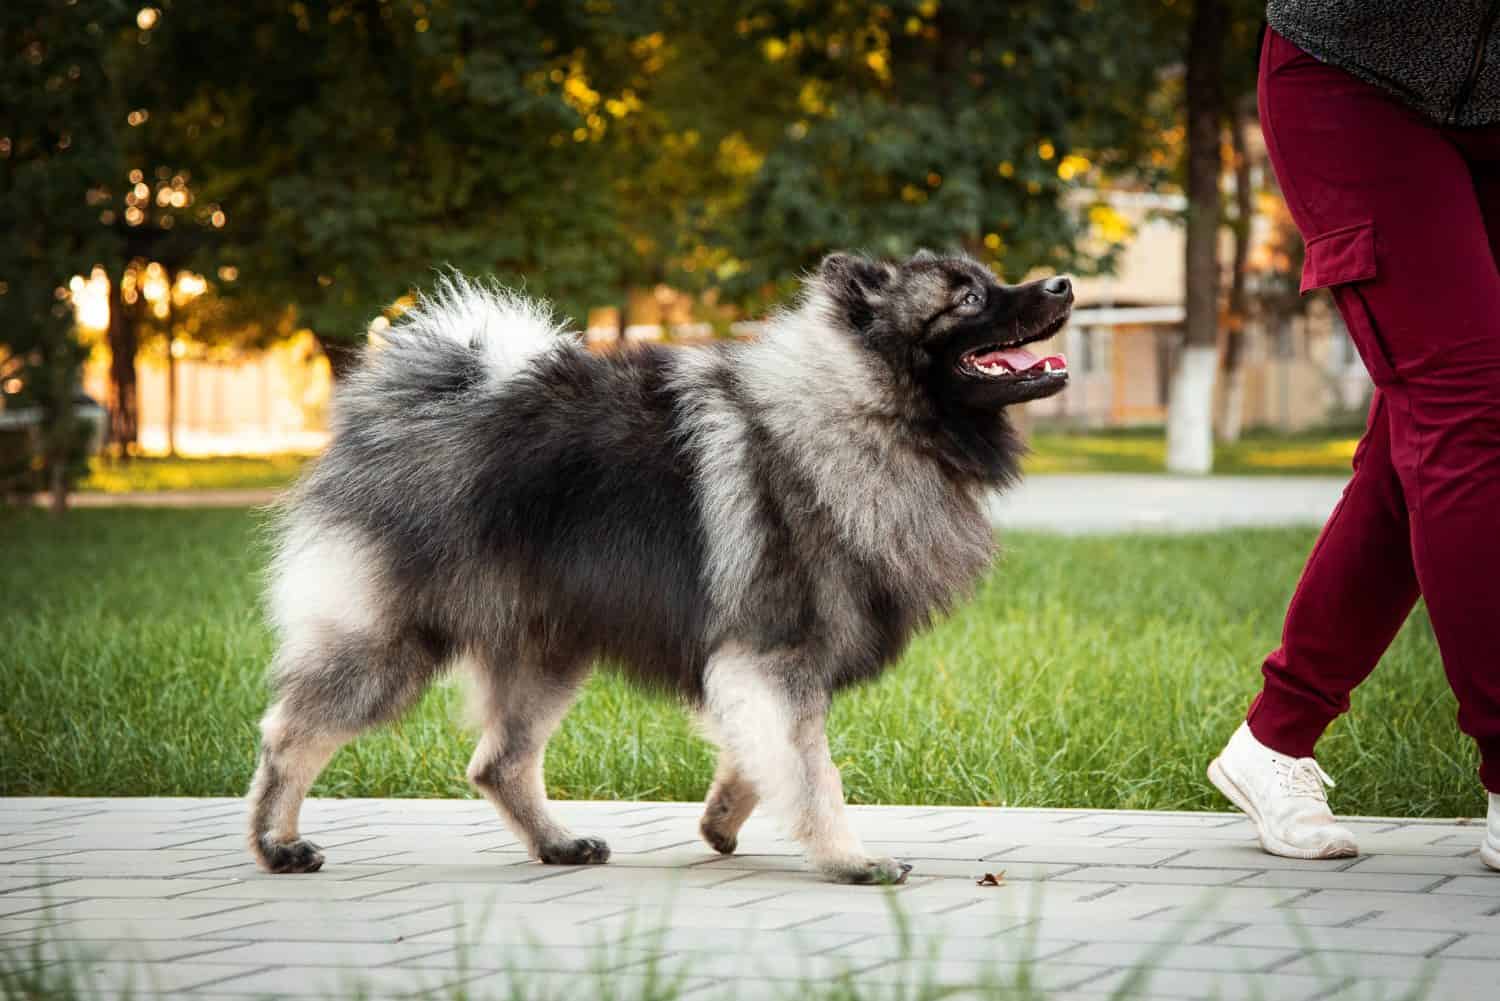 magnificent photographs of Keeshond, this is an anti-stress both in life and in photography, we can buy not only photographs of Keeshond, but also the kids themselves.